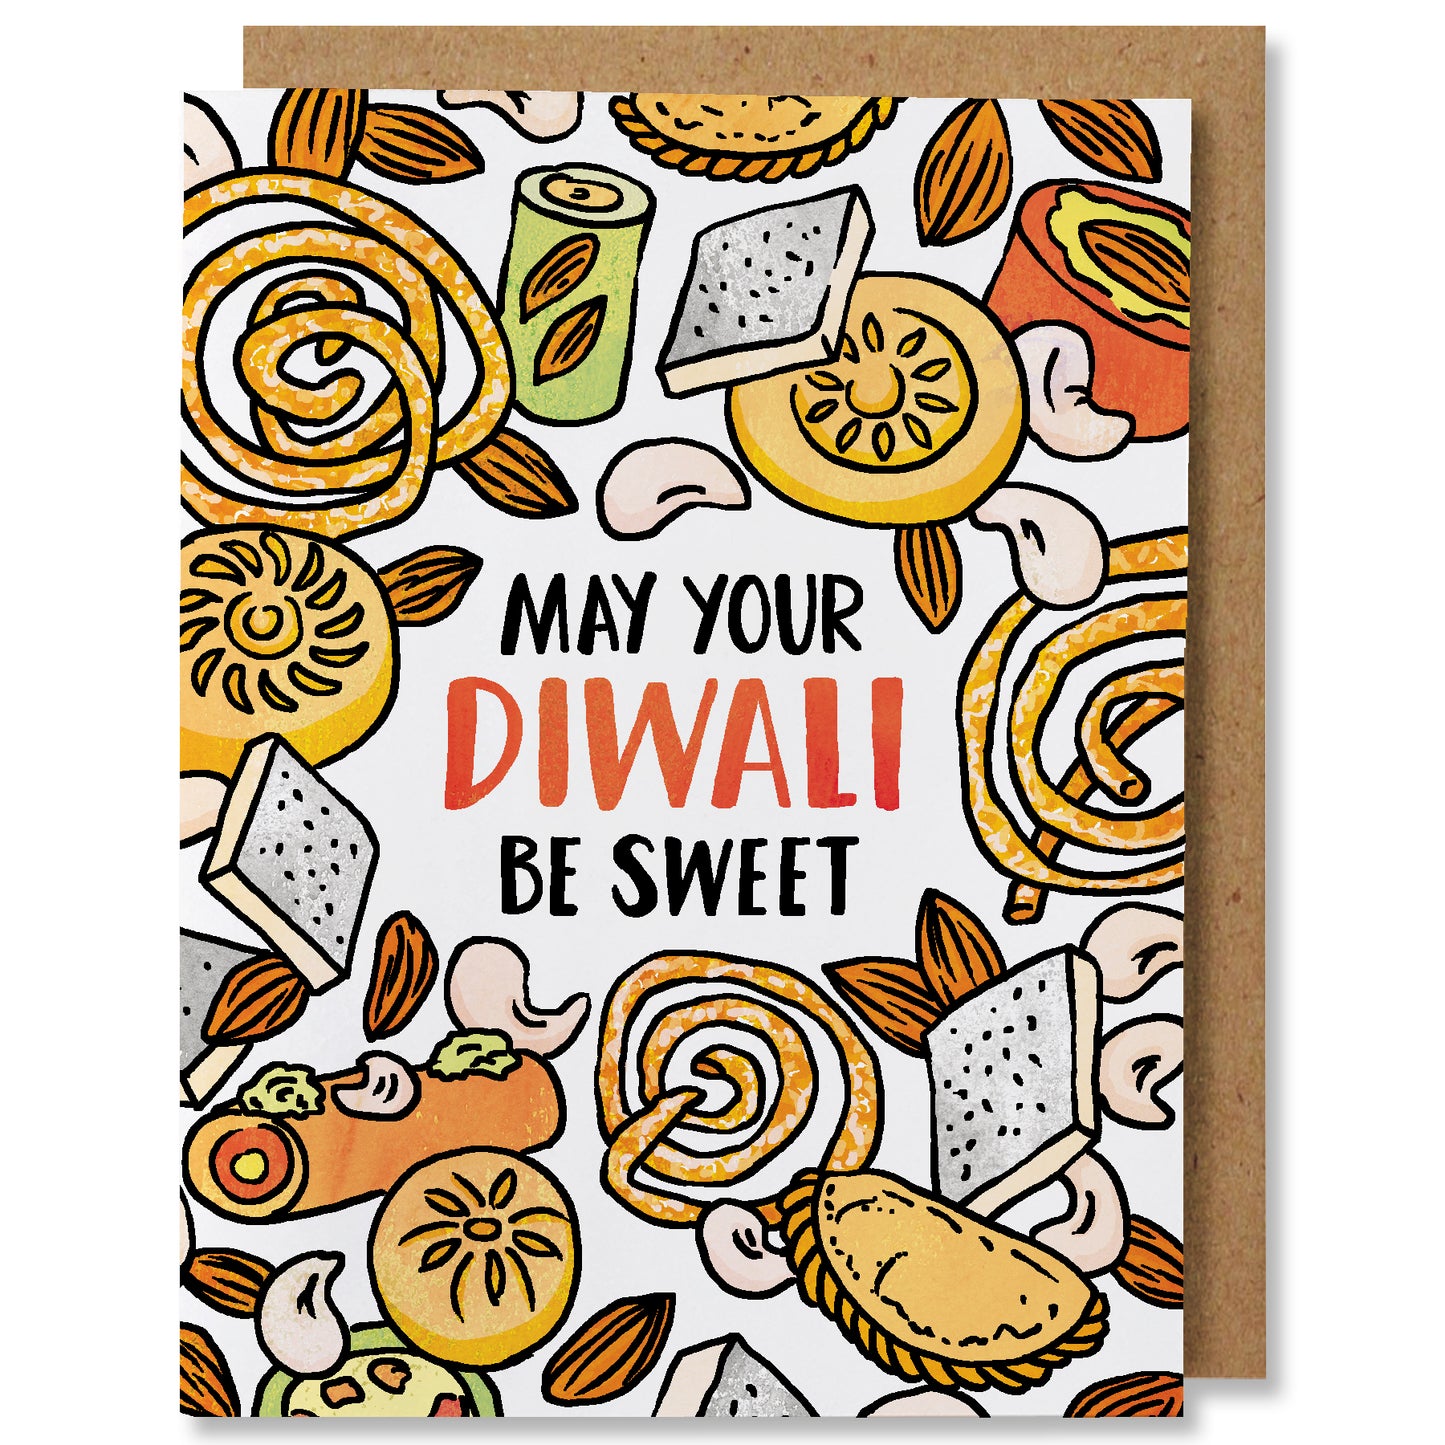 May Your Diwali Be Sweet - Illustrated Holiday Food Card